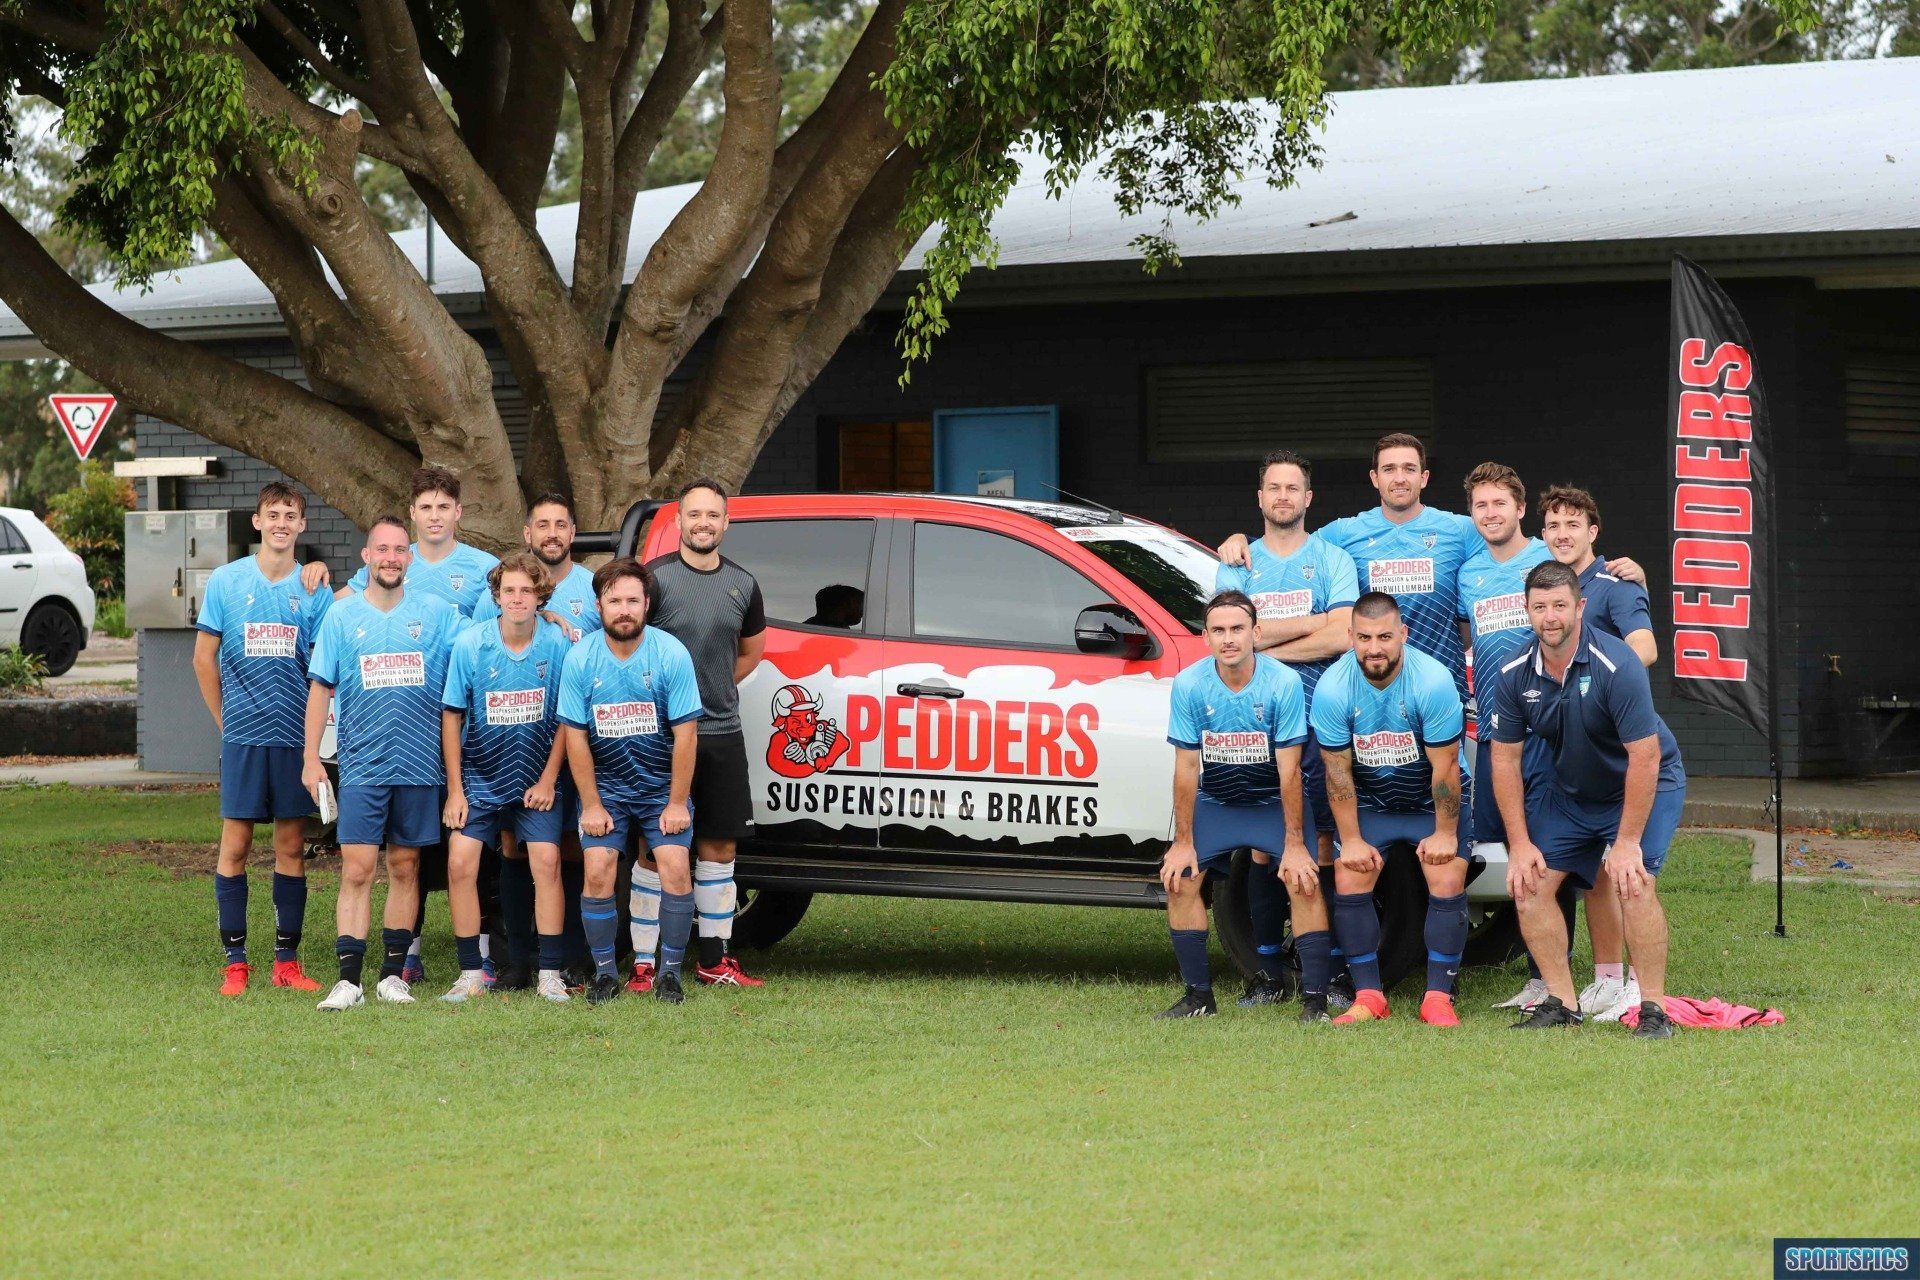 tweed united soccer team standing in front of a sponsor's vehicle